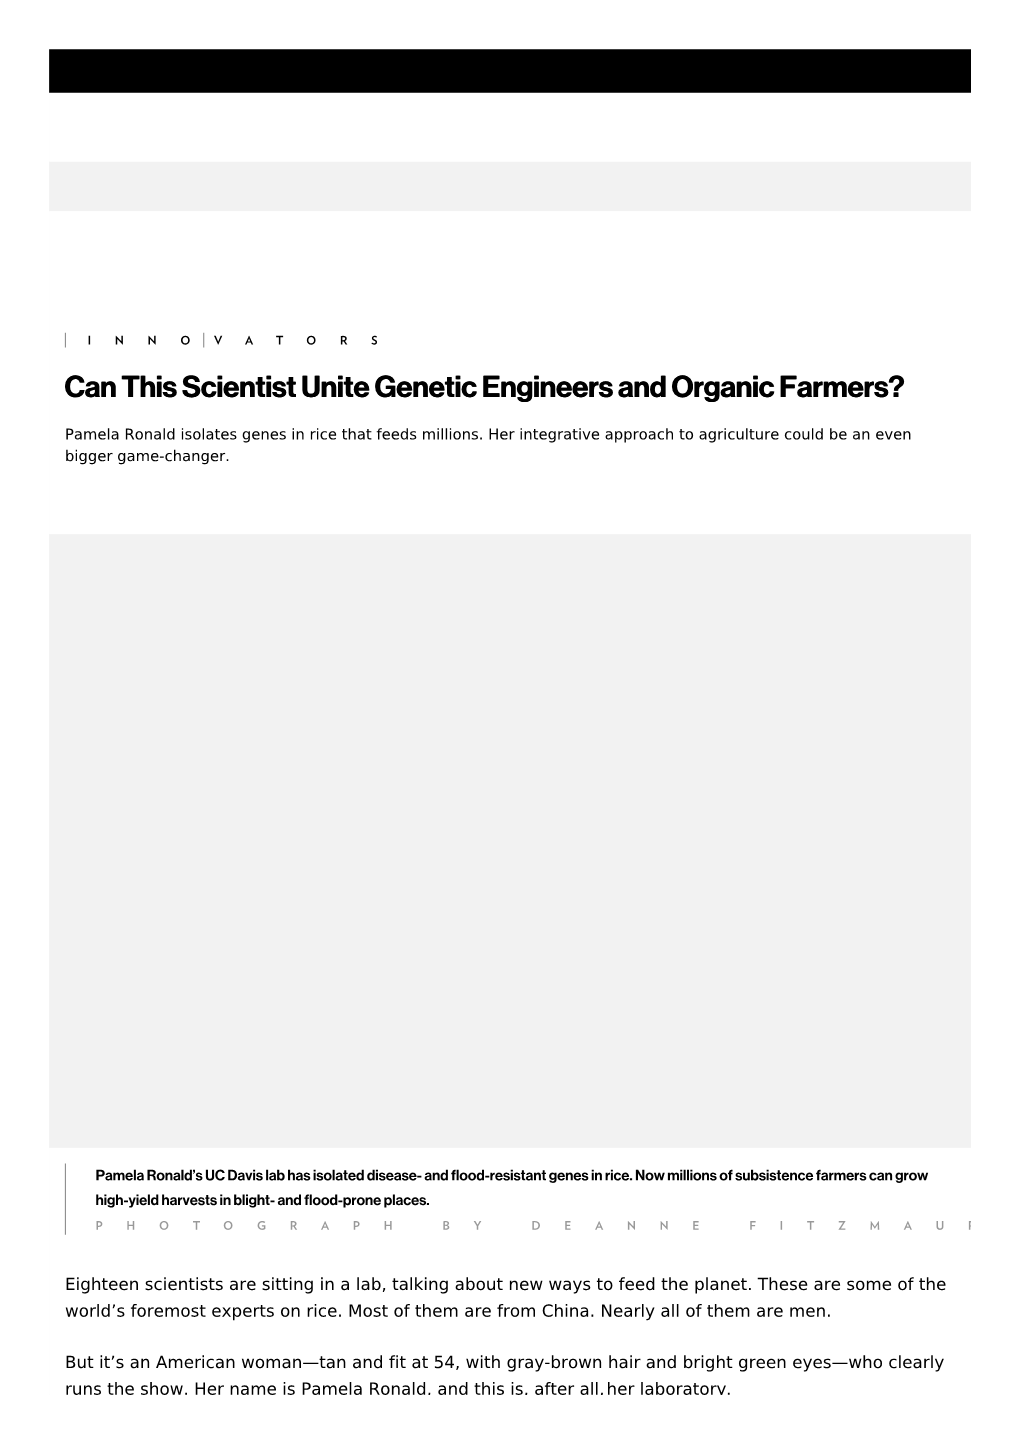 Can This Scientist Unite Genetic Engineers and Organic Farmers?